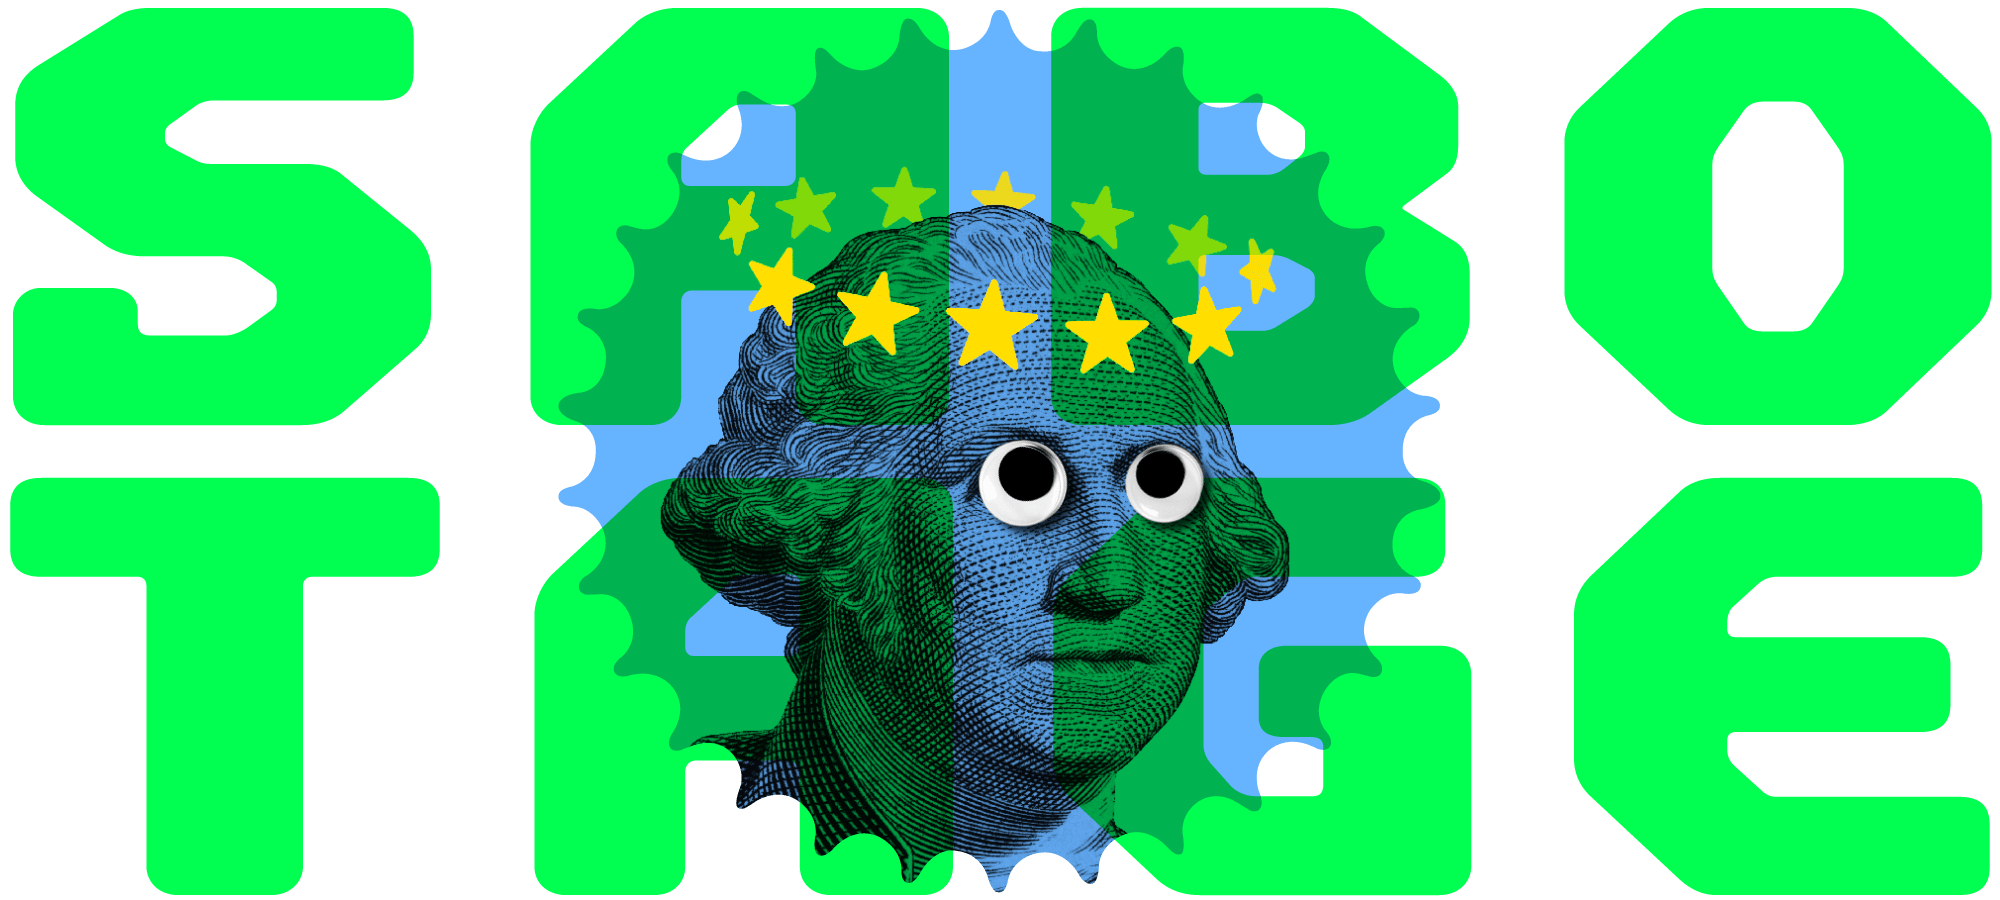 'Sabptage' header illustration – illustration of GW from a banknote looking comfused